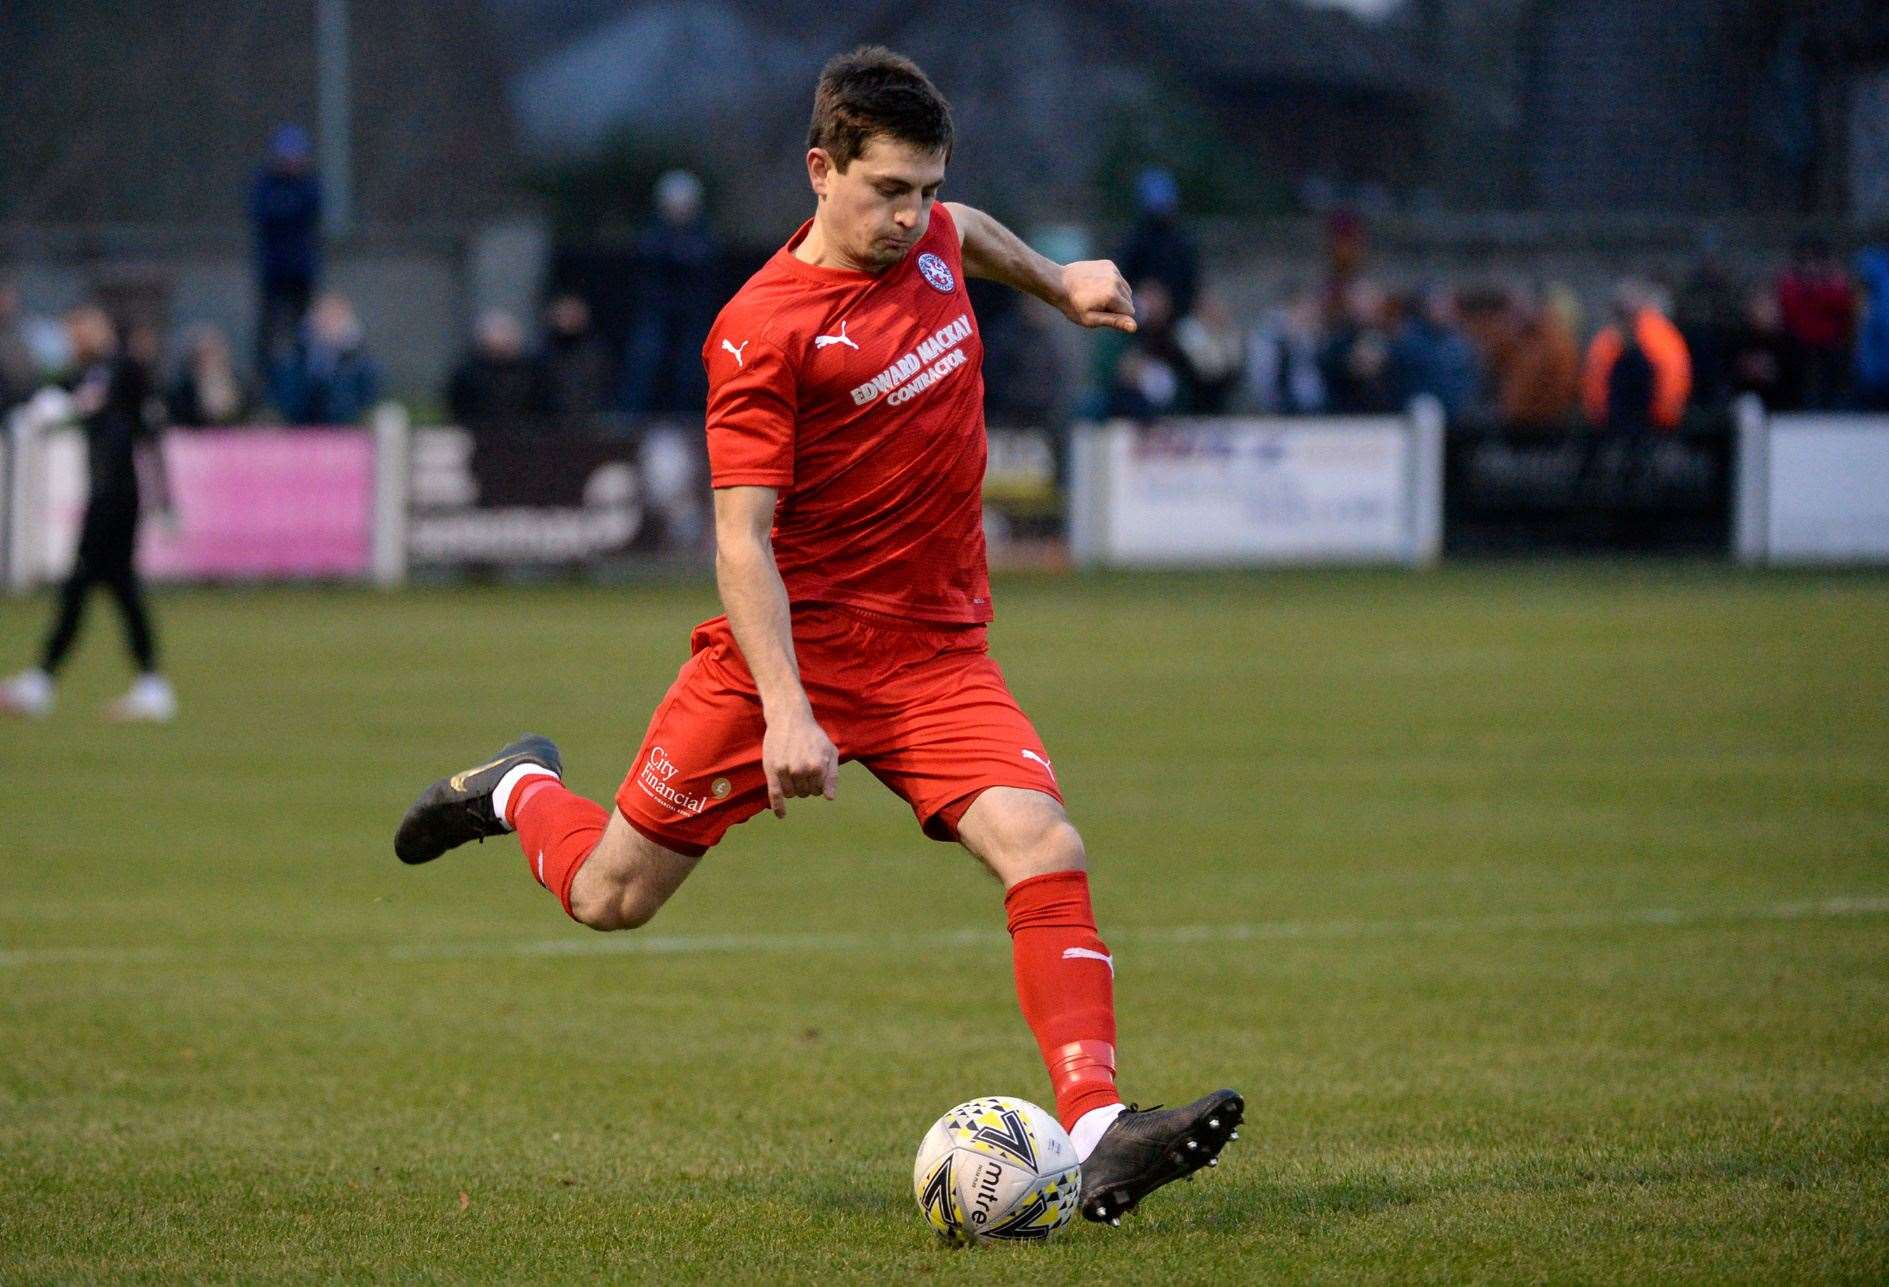 John Pickles will be a big loss to Brora but boss Craig Campbell is seeking quality signings. Picture: James Mackenzie